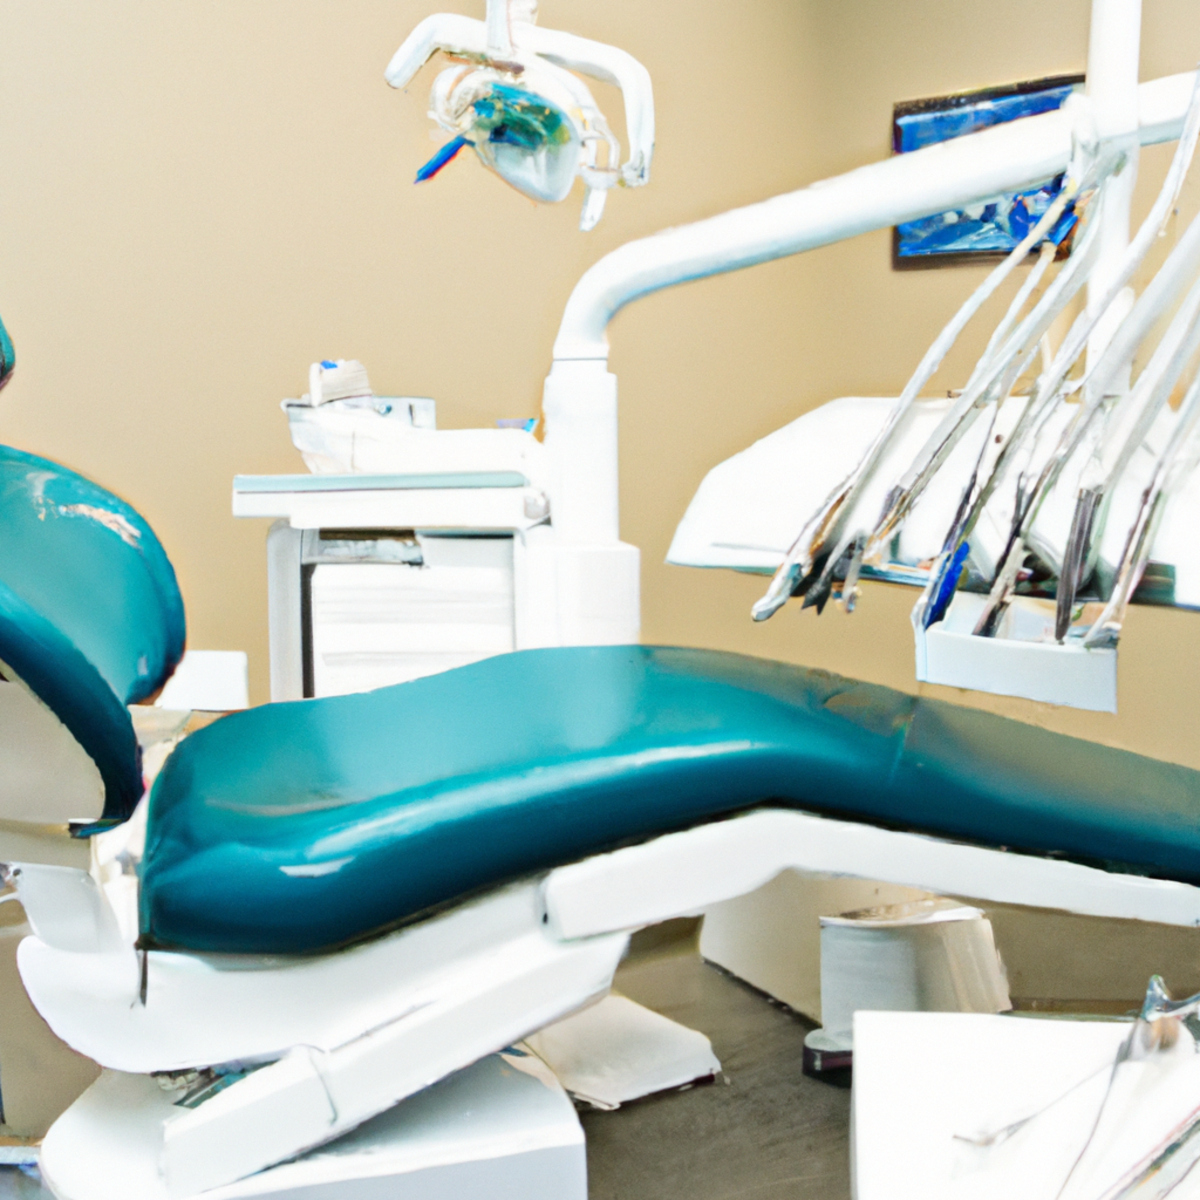 Well-equipped dental clinic with dental chair, instruments, and supplies neatly arranged on a tray. Sterile and professional environment.